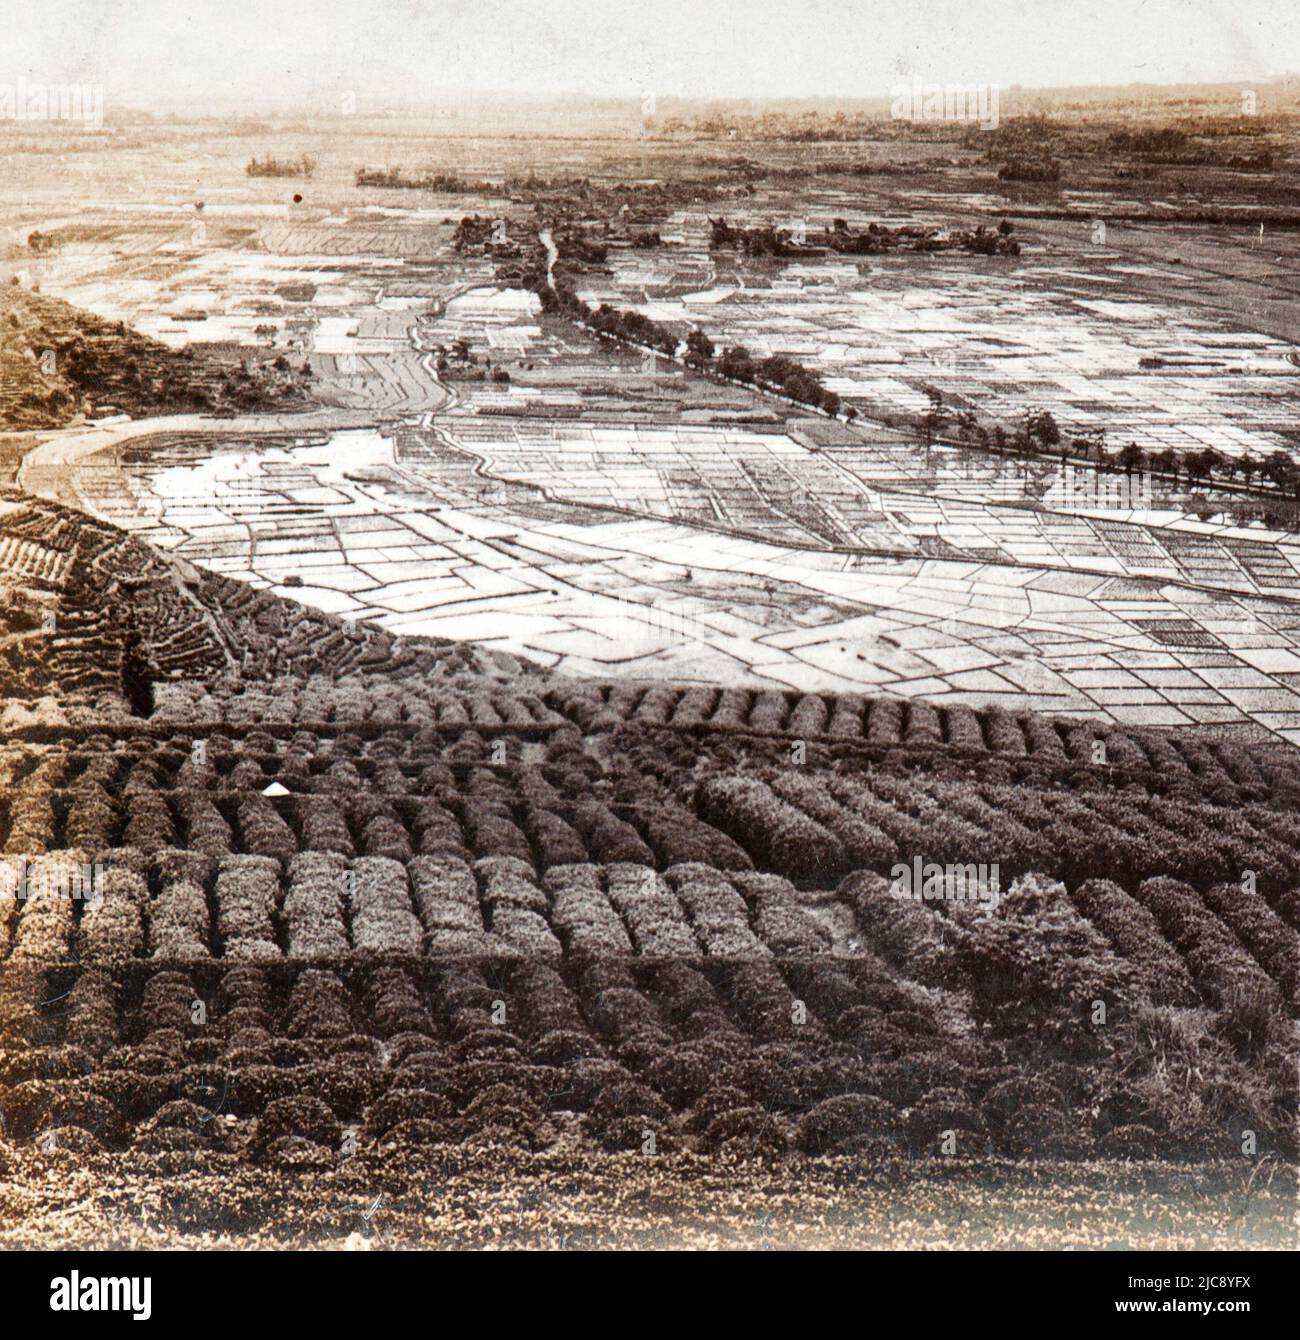 View of Tea and rice fields in Shizuoka in late nineteenth century, Japan Stock Photo